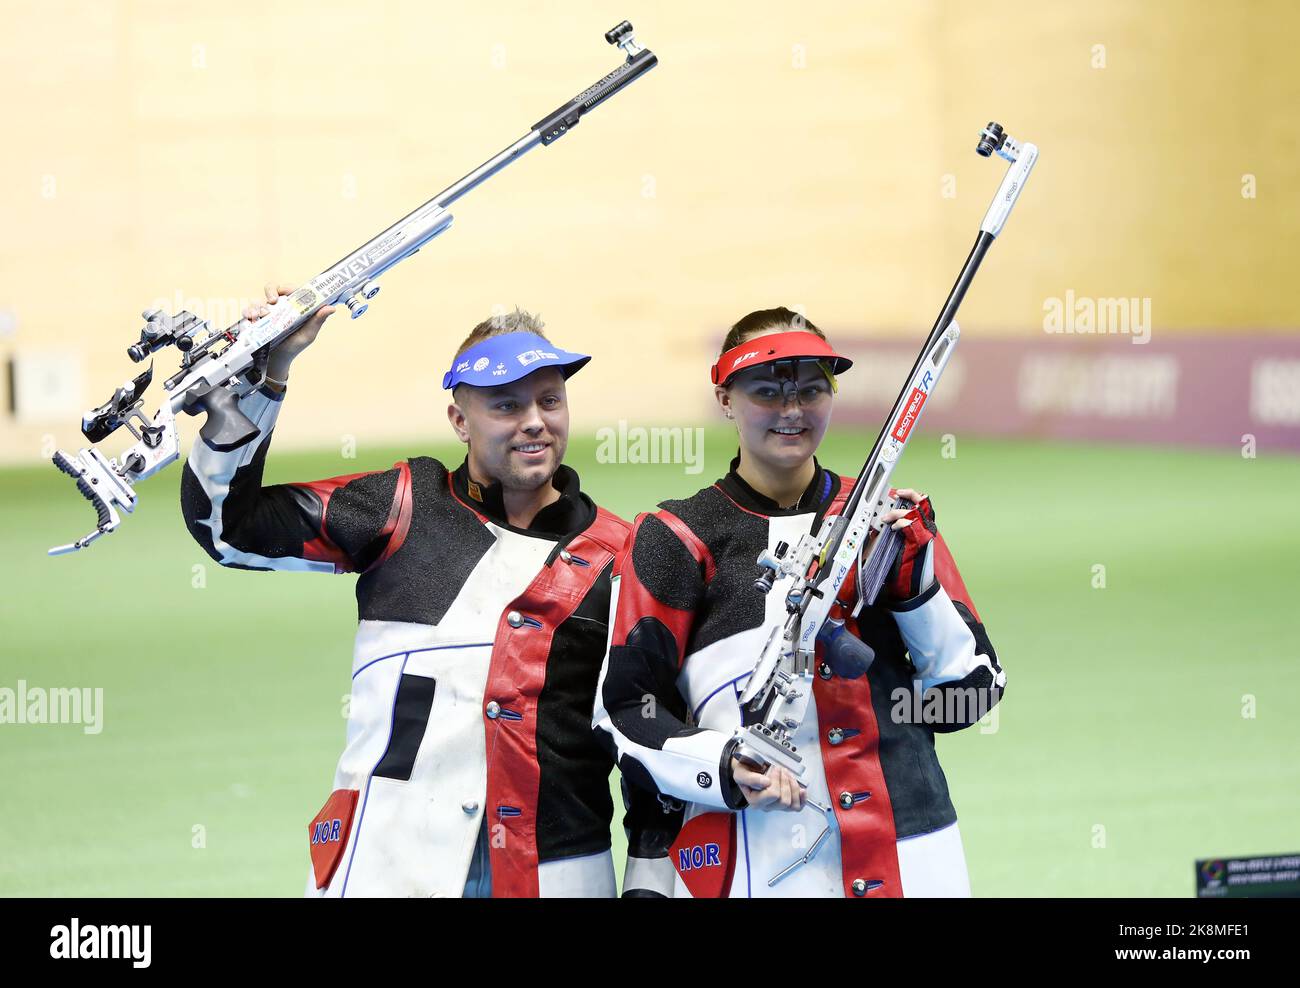 Cairo, Egypt. 24th Oct, 2022. Jenny Stene (R)/Simon Claussen of Norway celebrate after winning the 50m rifle 3 positions mixed team gold medal match against Stephanie Laura Scurrah Grundsoee/Steffen Olsen of Denmark at the ISSF World Championship Rifle/Pistol in Cairo, Egypt, Oct. 24, 2022. Credit: Ahmed Gomaa/Xinhua/Alamy Live News Stock Photo